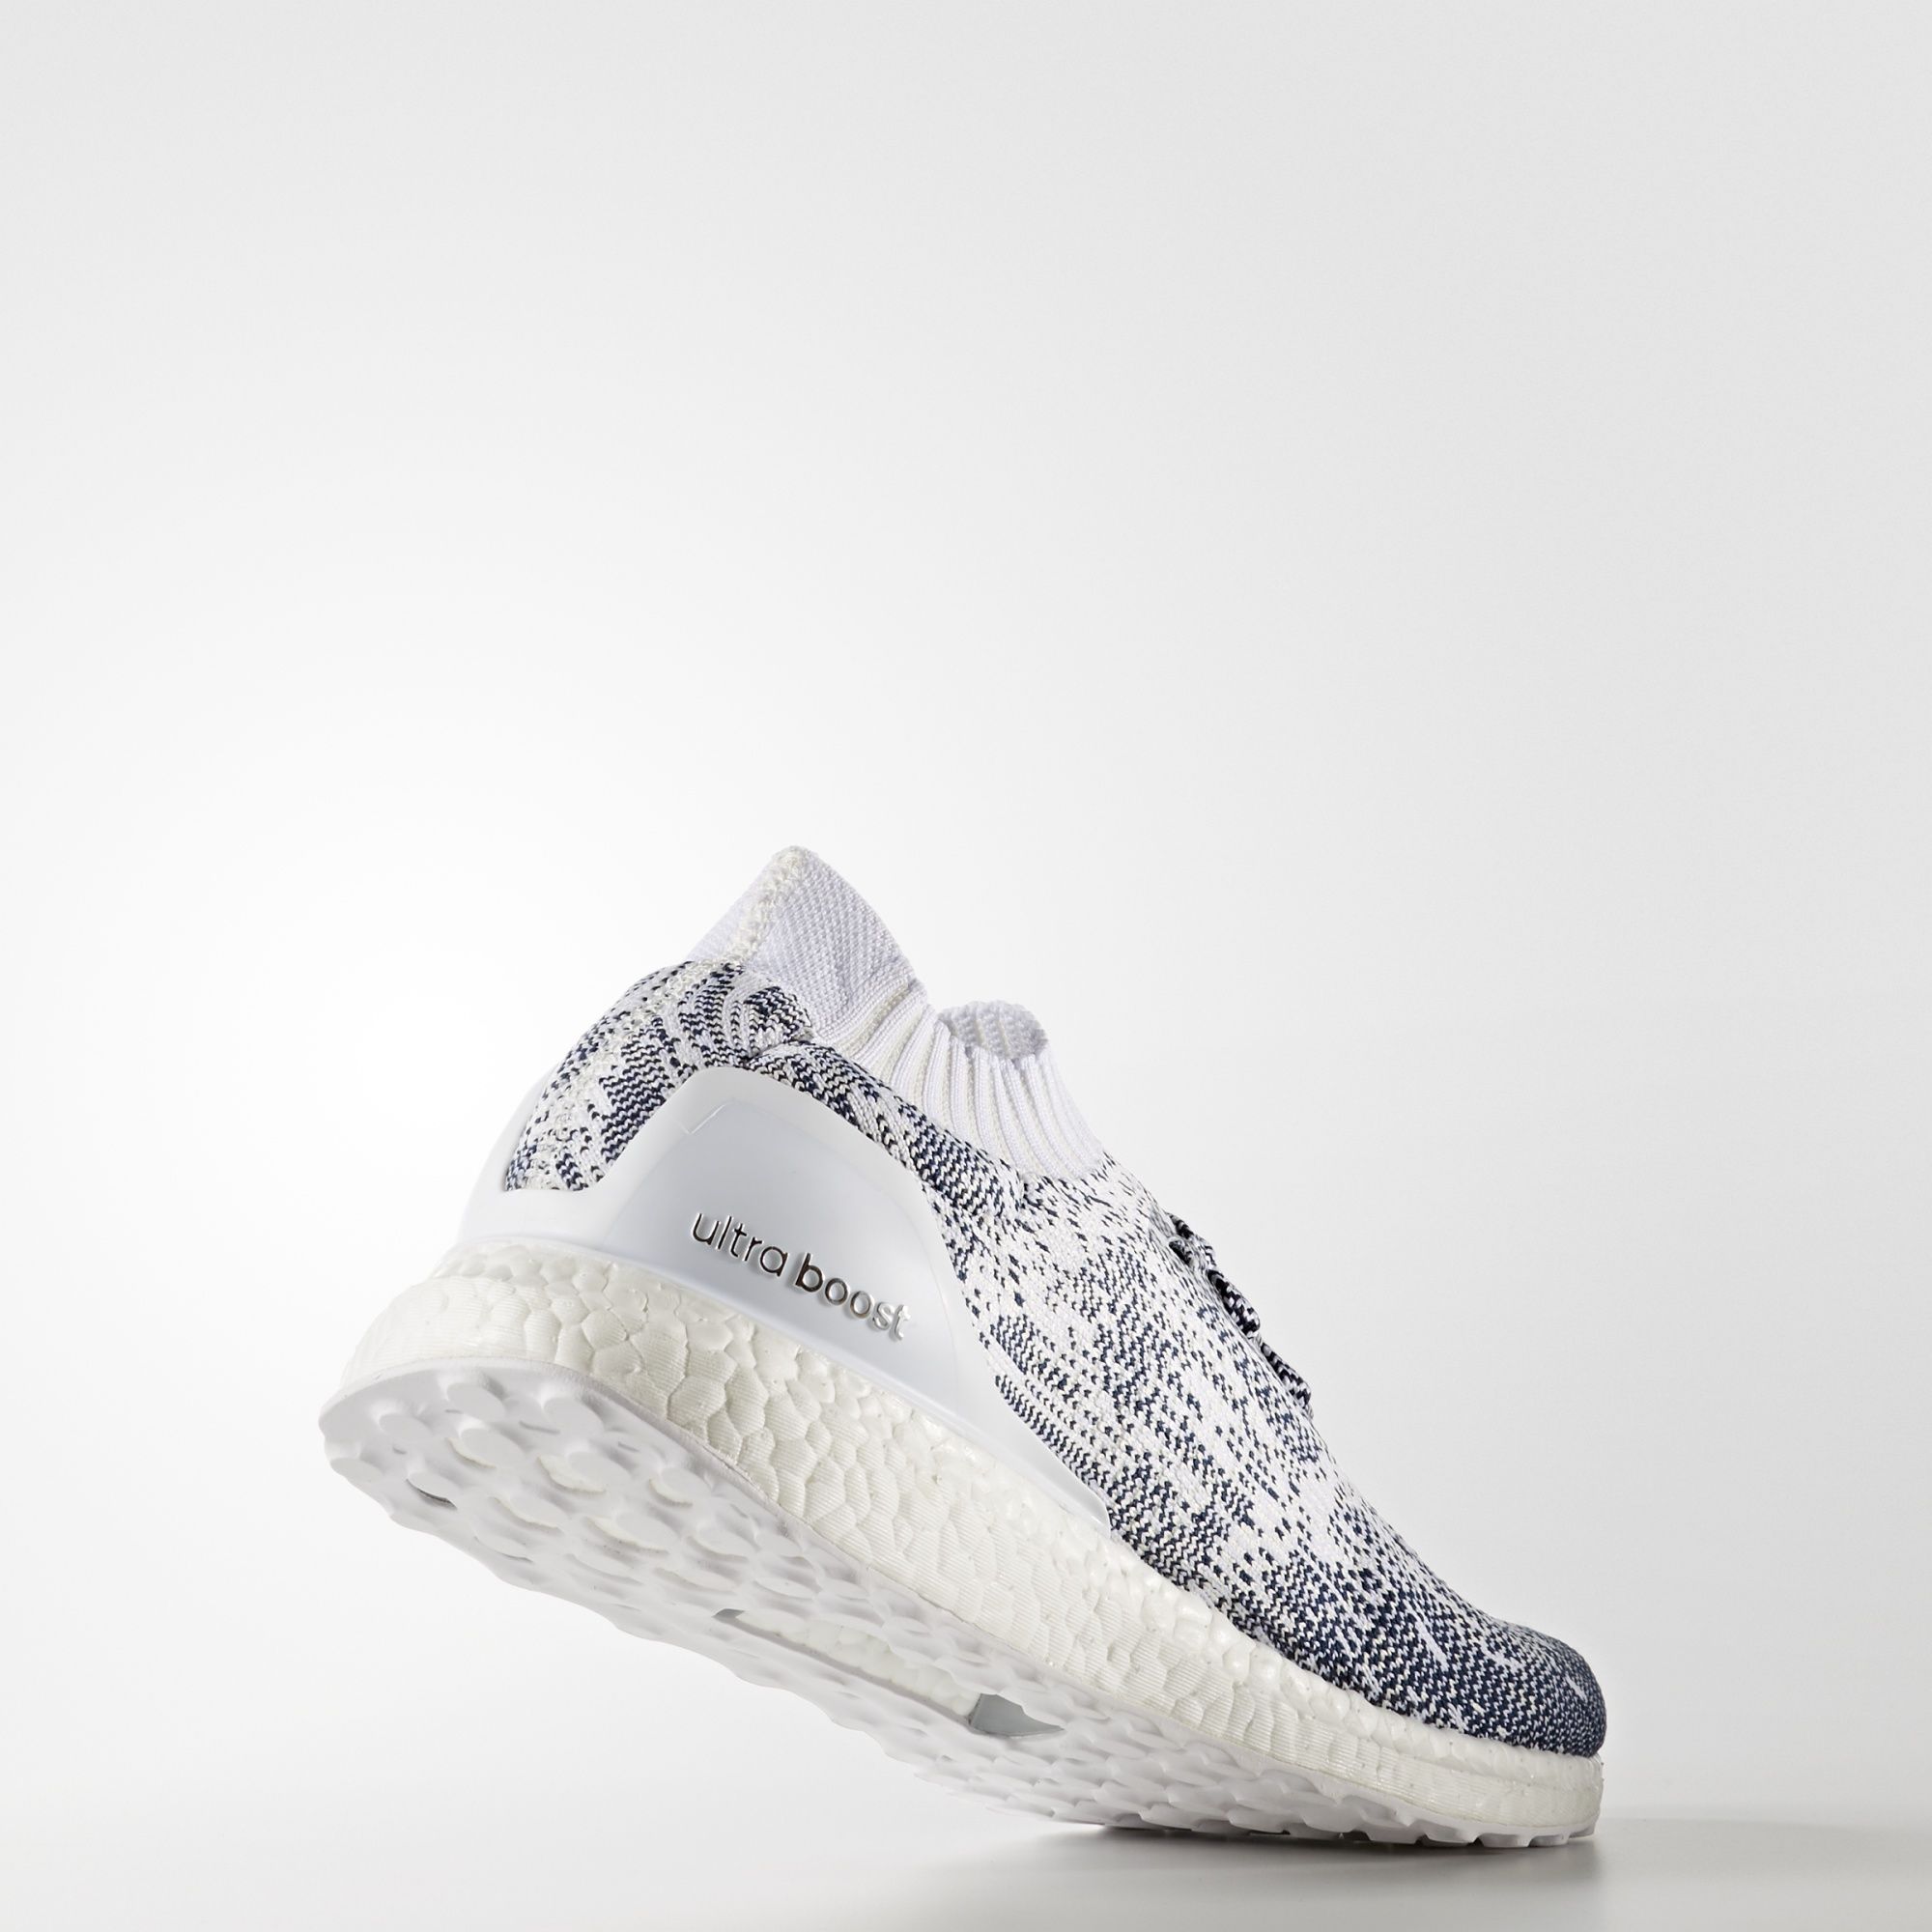 Adidas Ultra Boost Uncaged
« Non Dyed »